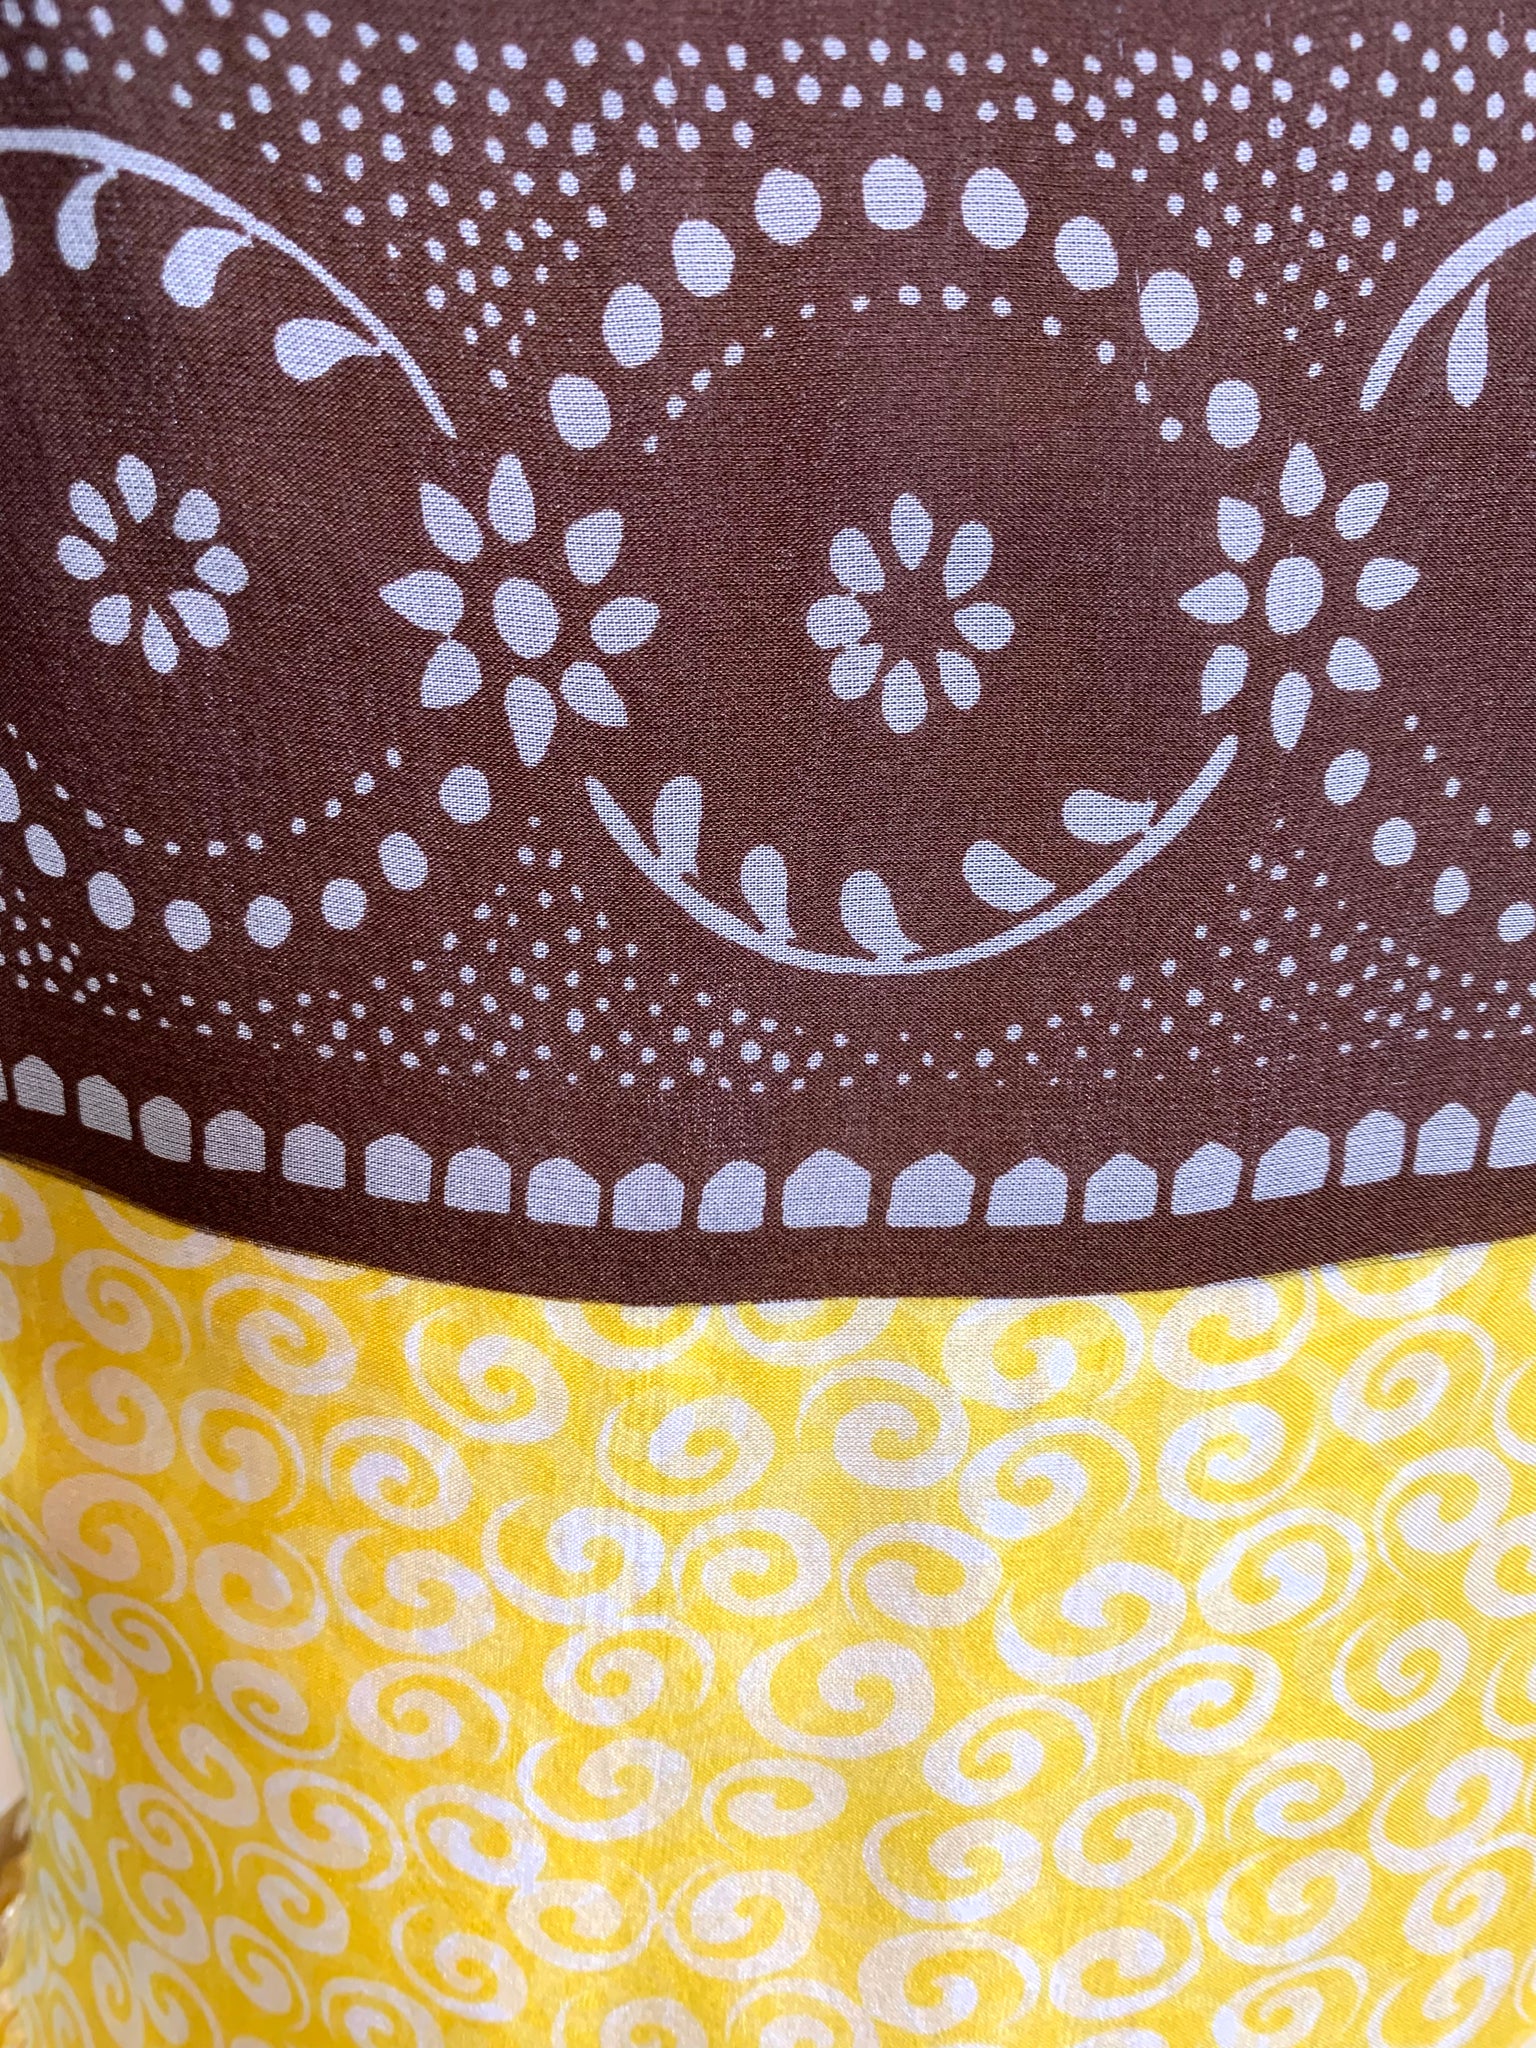  Oscar de la Renta 70s Yellow and White Print Silk Gown with Cocoa Trim DETAIL 4 of 5